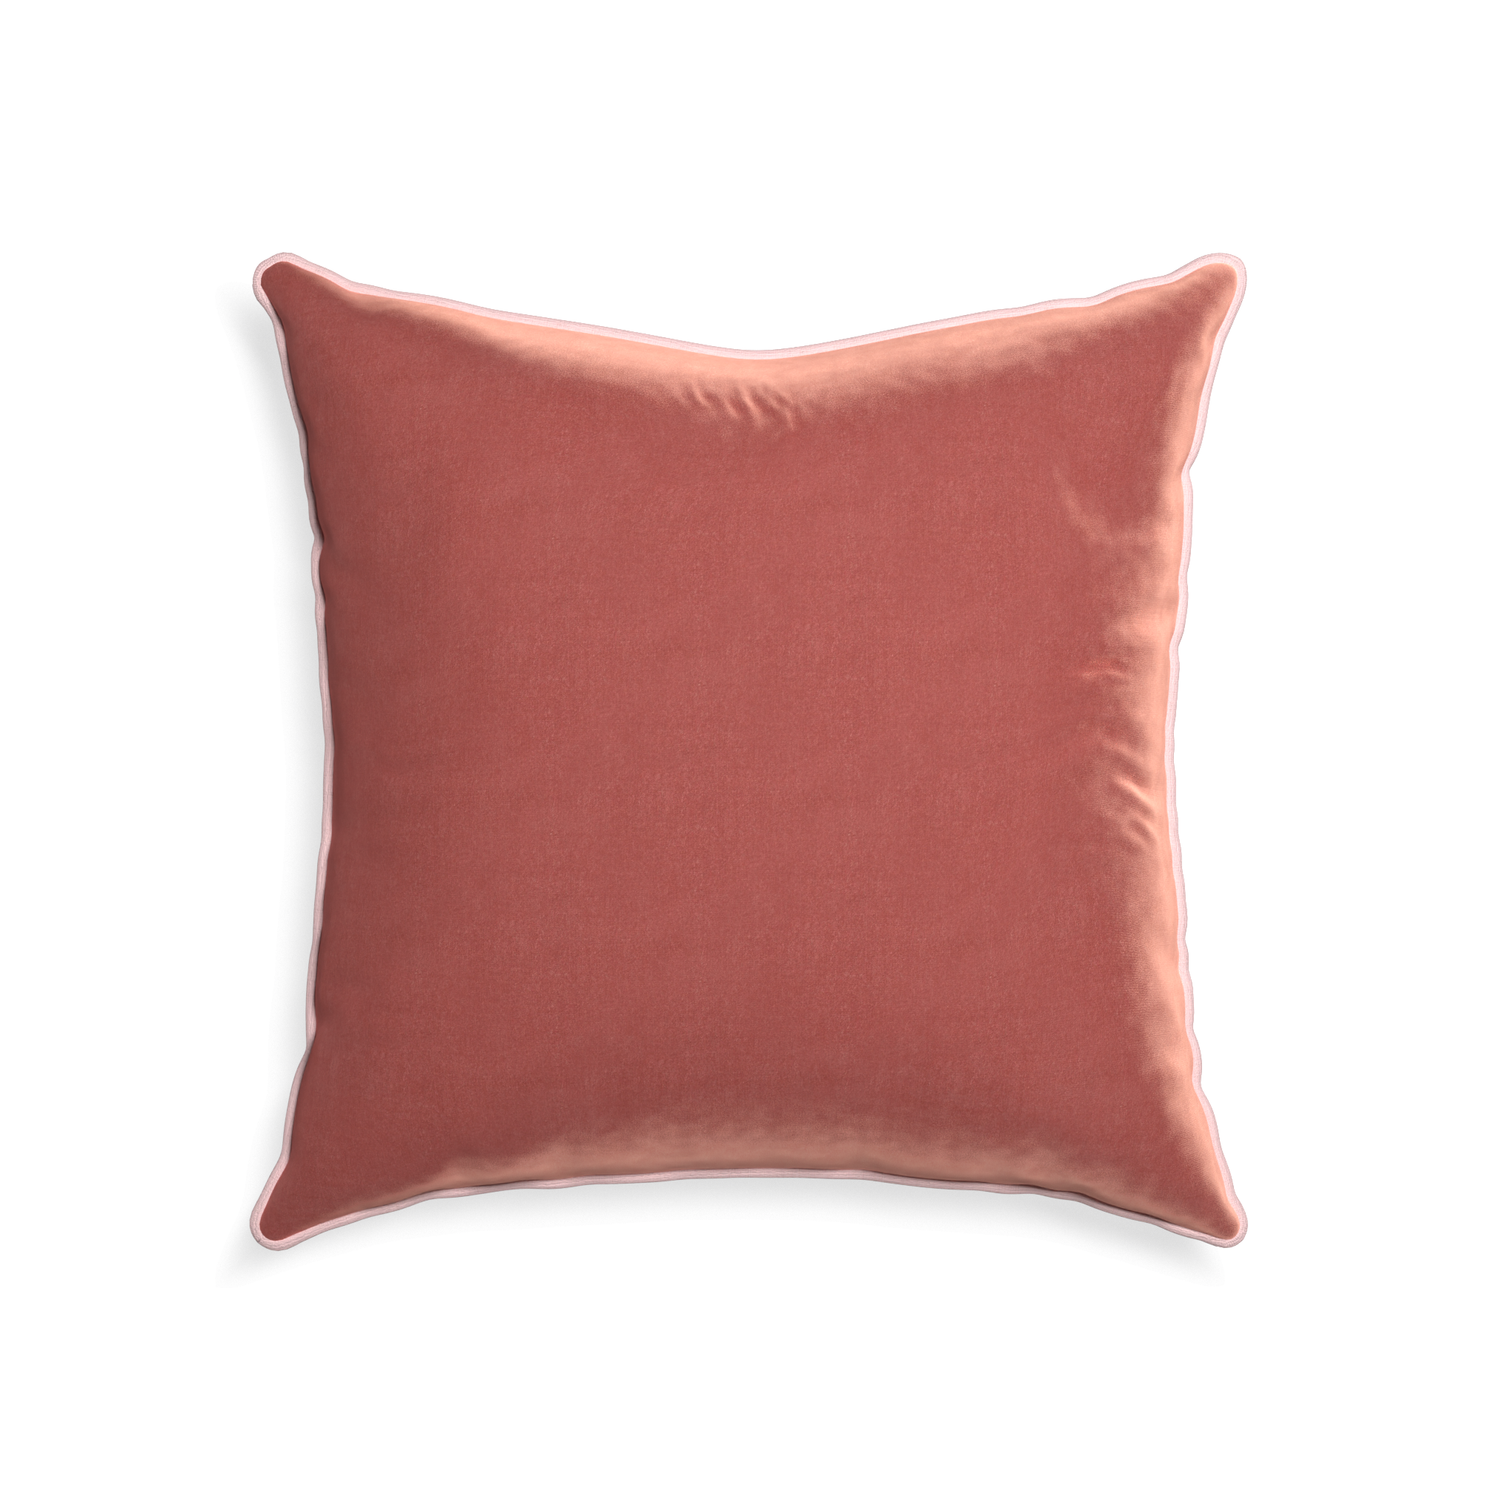 22-square cosmo velvet custom pillow with petal piping on white background